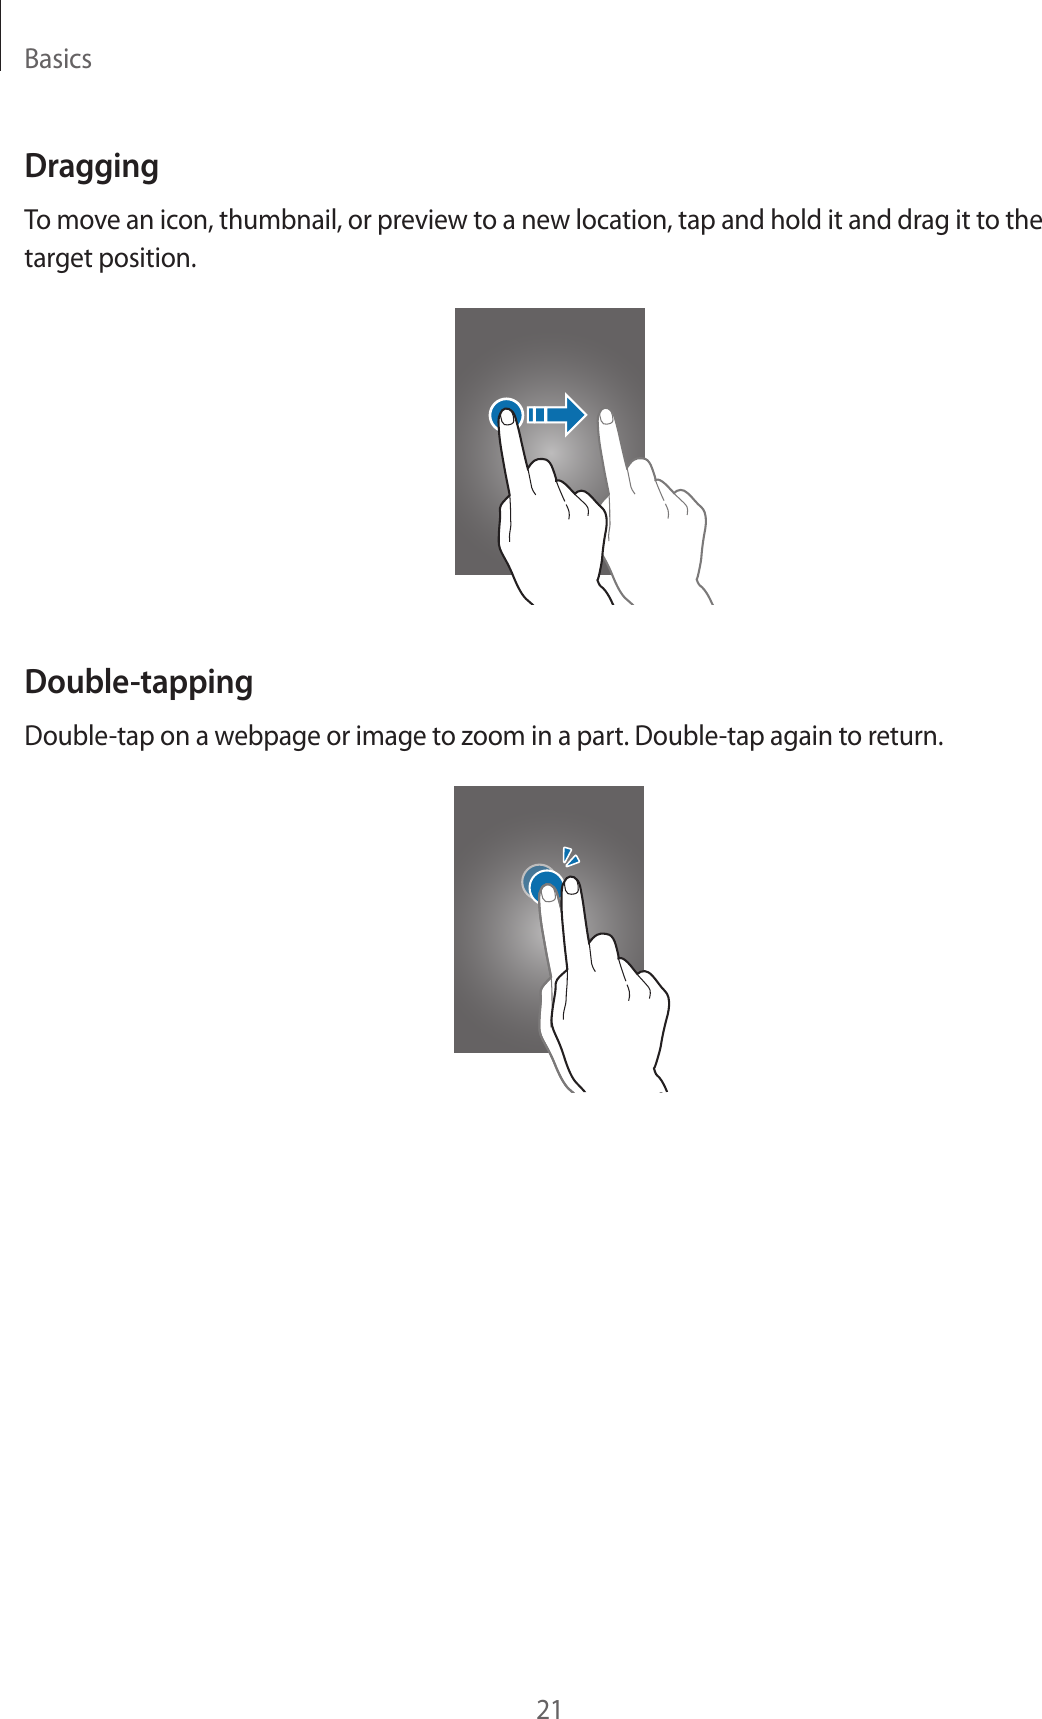 Basics21DraggingTo move an icon, thumbnail, or preview to a new location, tap and hold it and drag it to the target position.Double-tappingDouble-tap on a webpage or image to zoom in a part. Double-tap again to return.